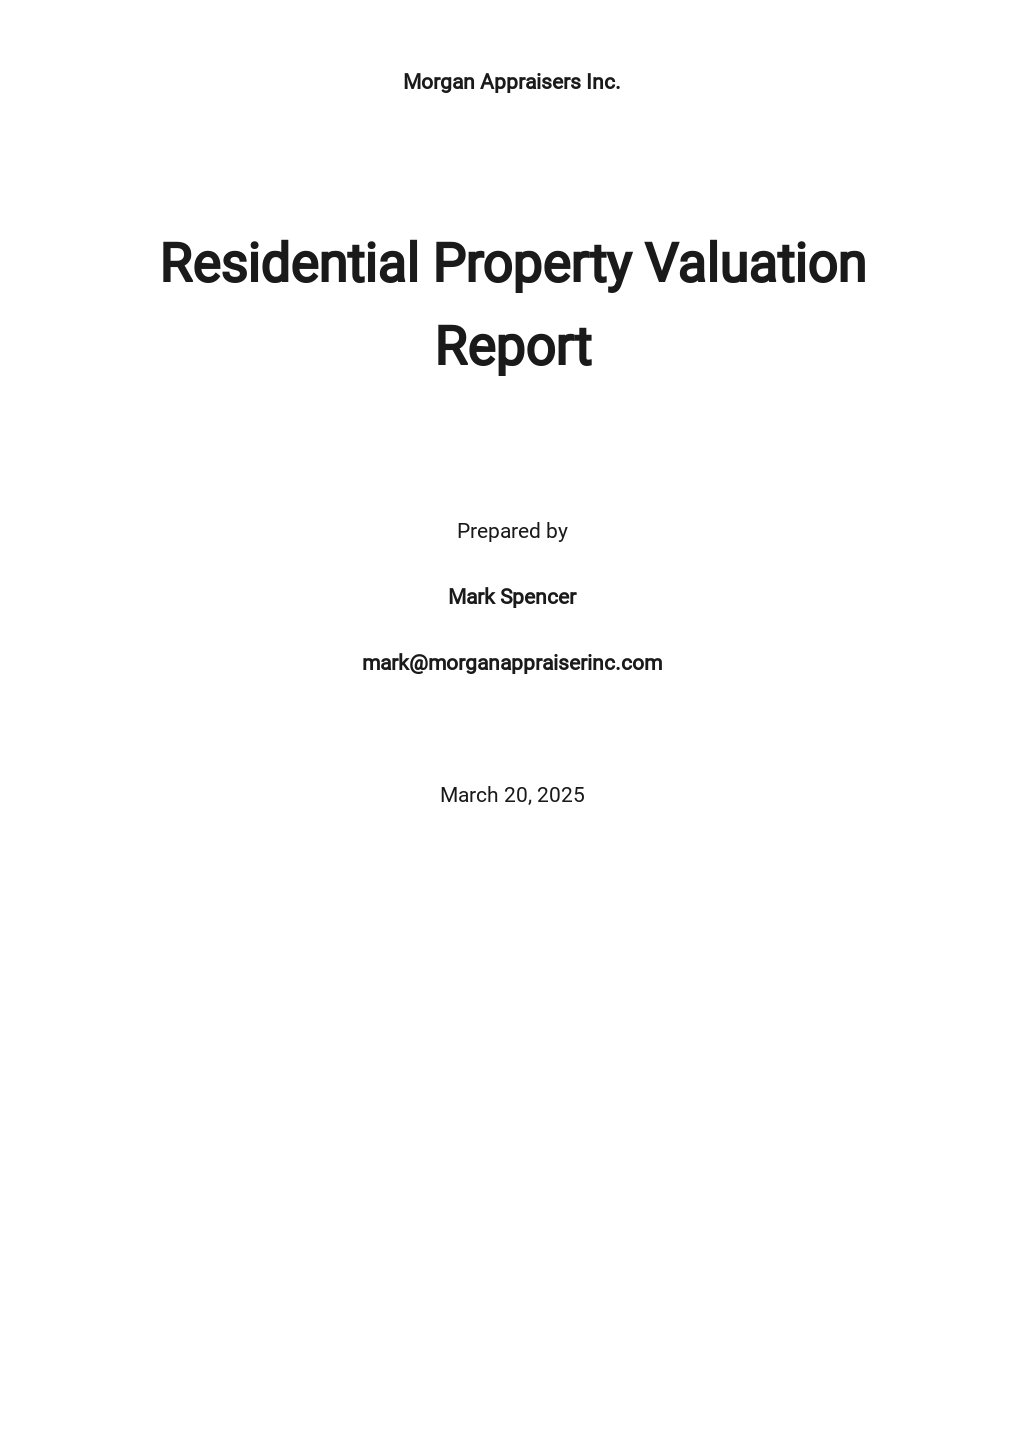 Real Estate Property Valuation Report Template.jpe